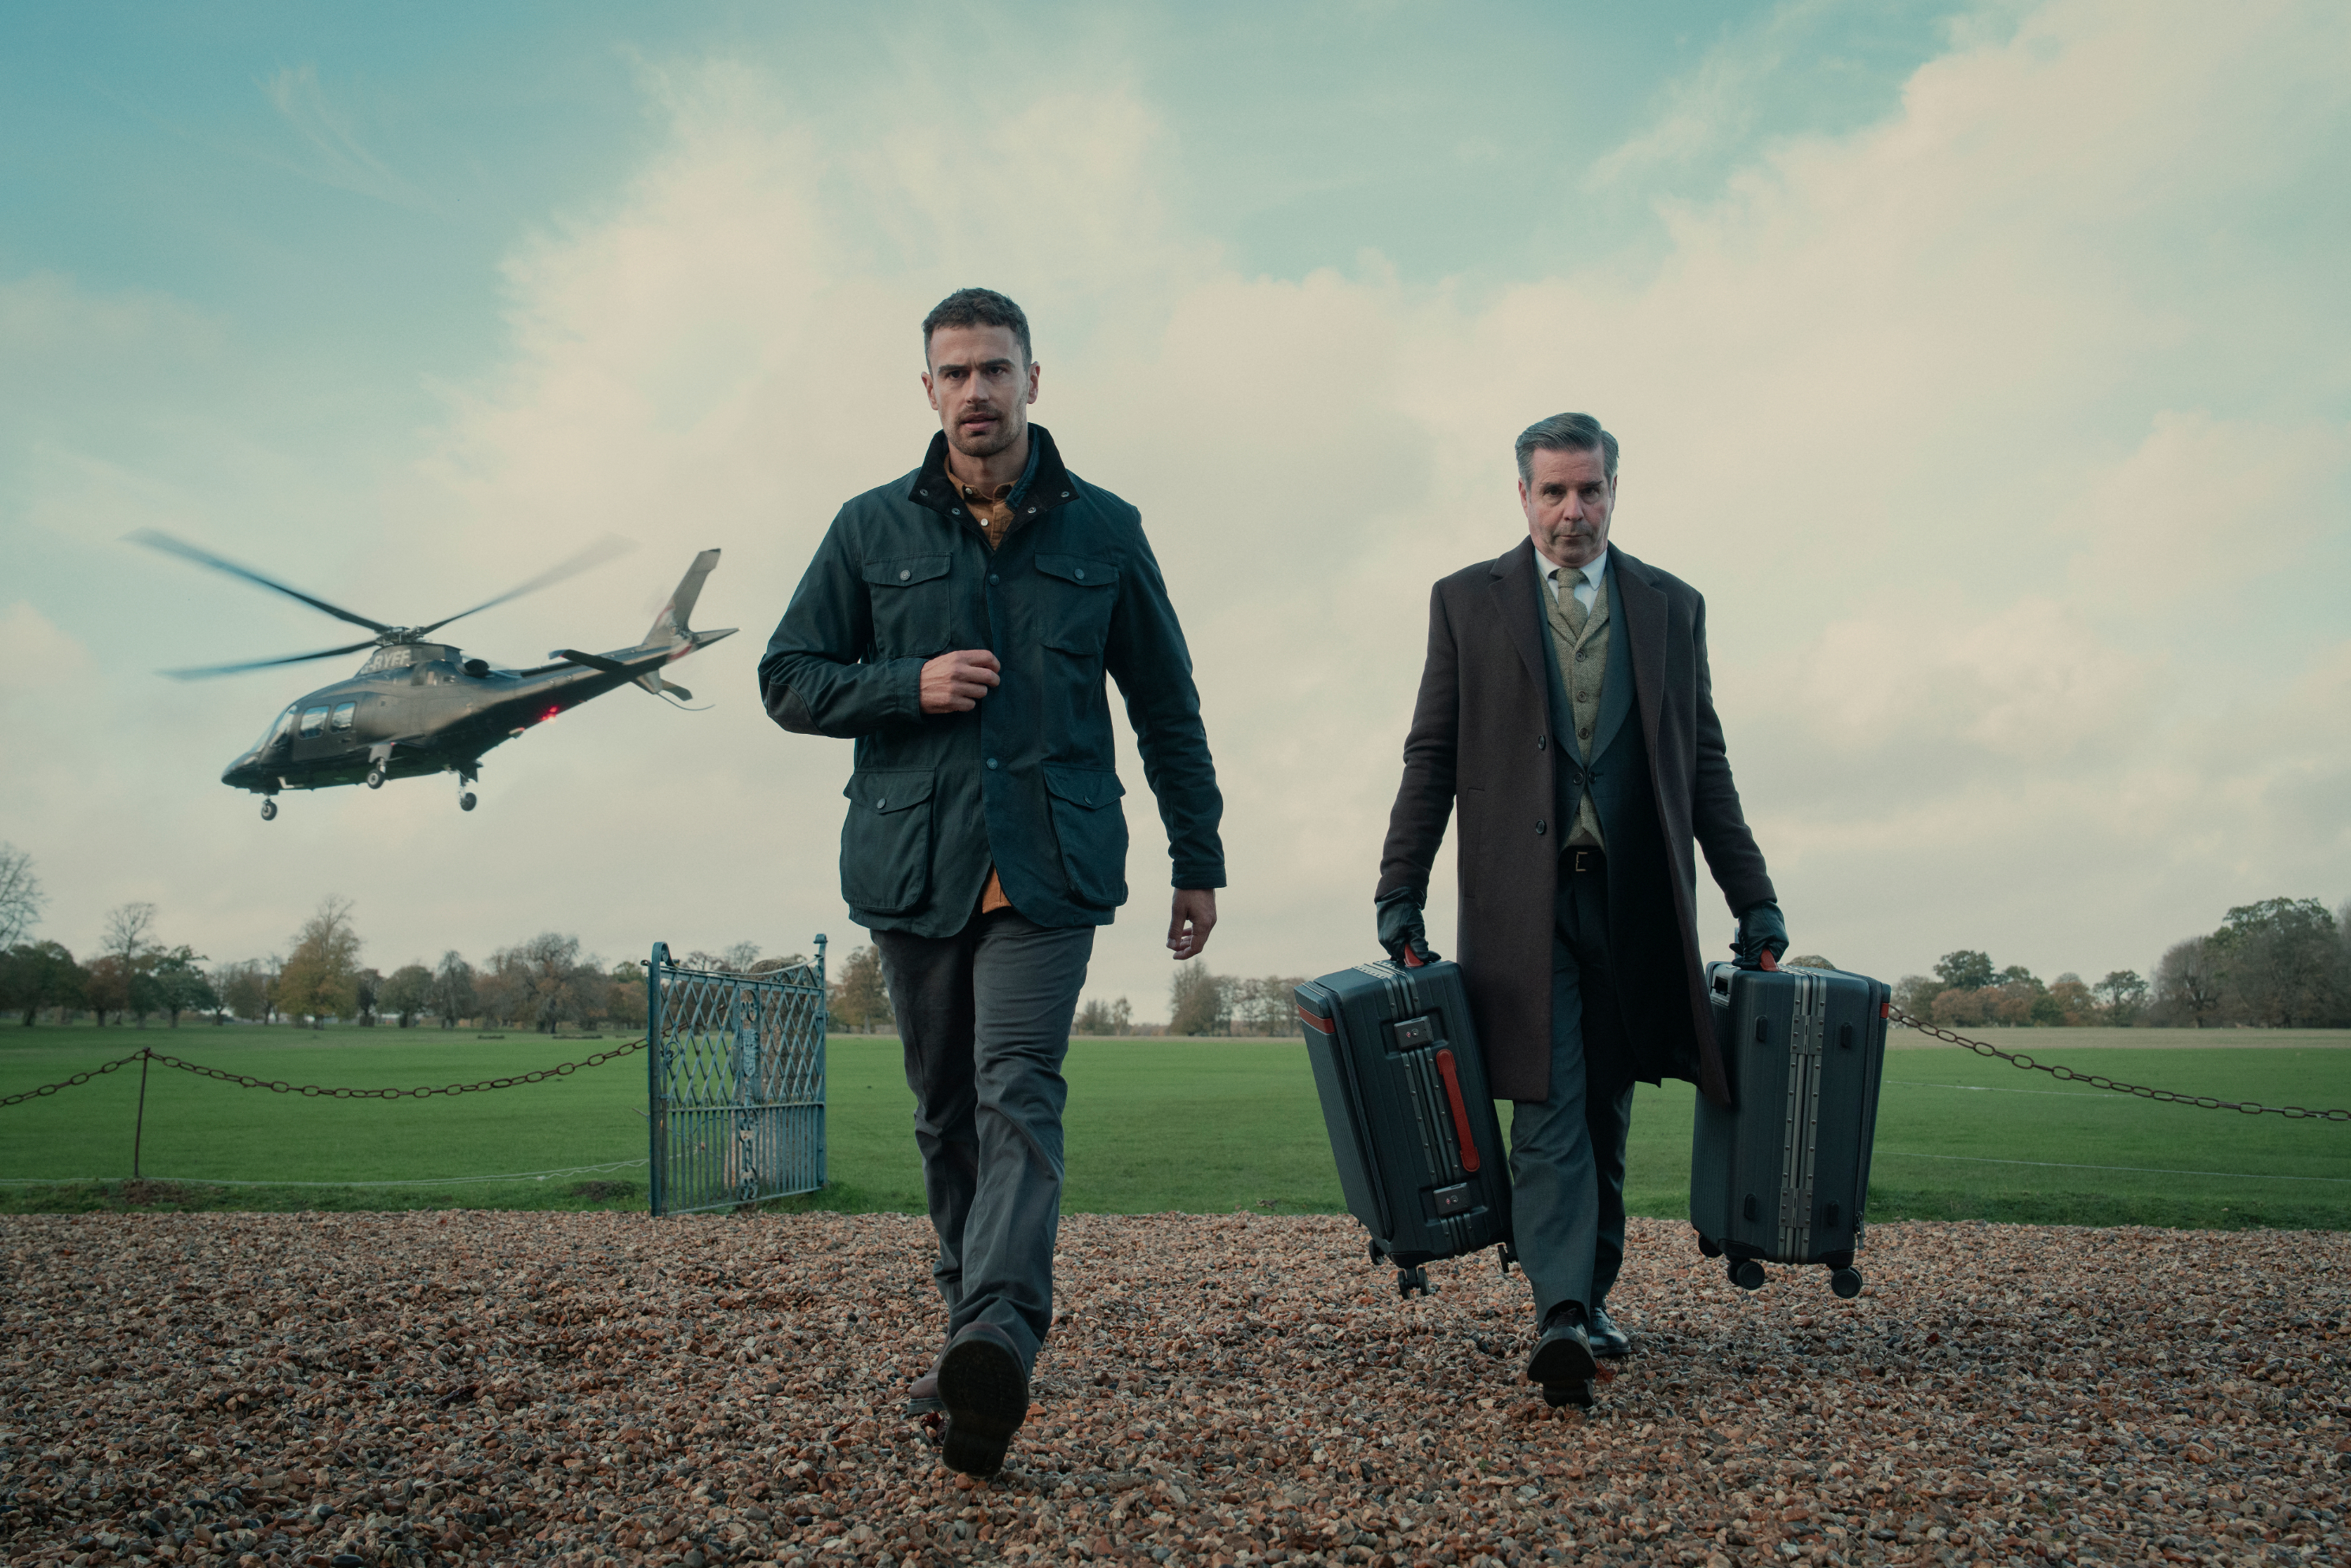 two men in jackets walking away from a helicopter, one has a luggage roller in each hand